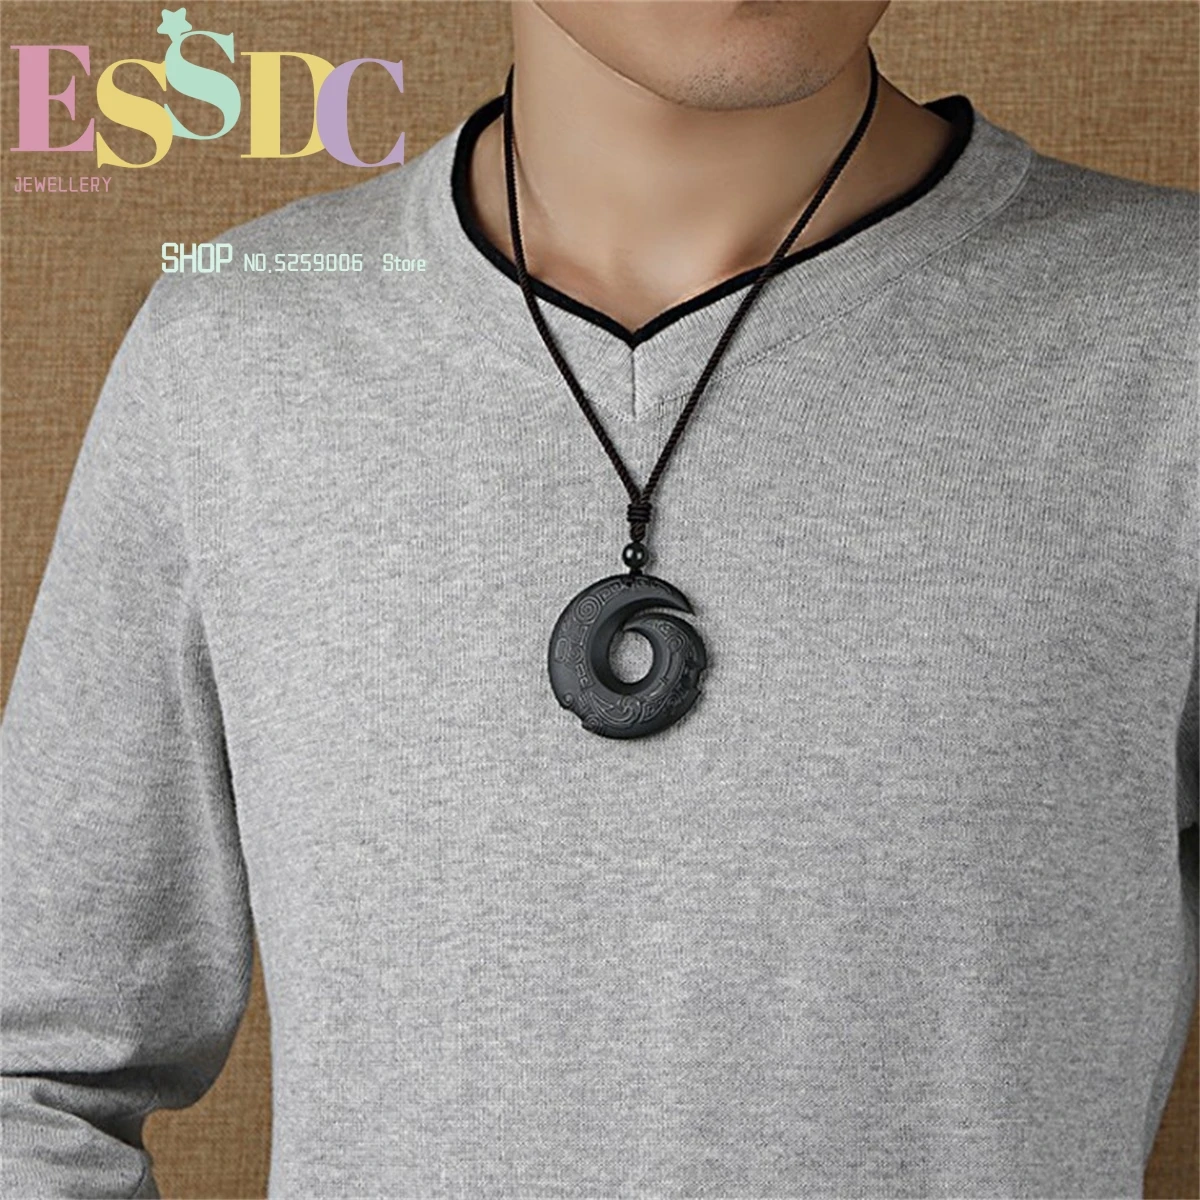 

Natural Jade Pendant Necklace Hetian Jade Jewelry For Men Gift Buddhist Lucky Charm Fashion Women's Men's Amulet Hand Carving